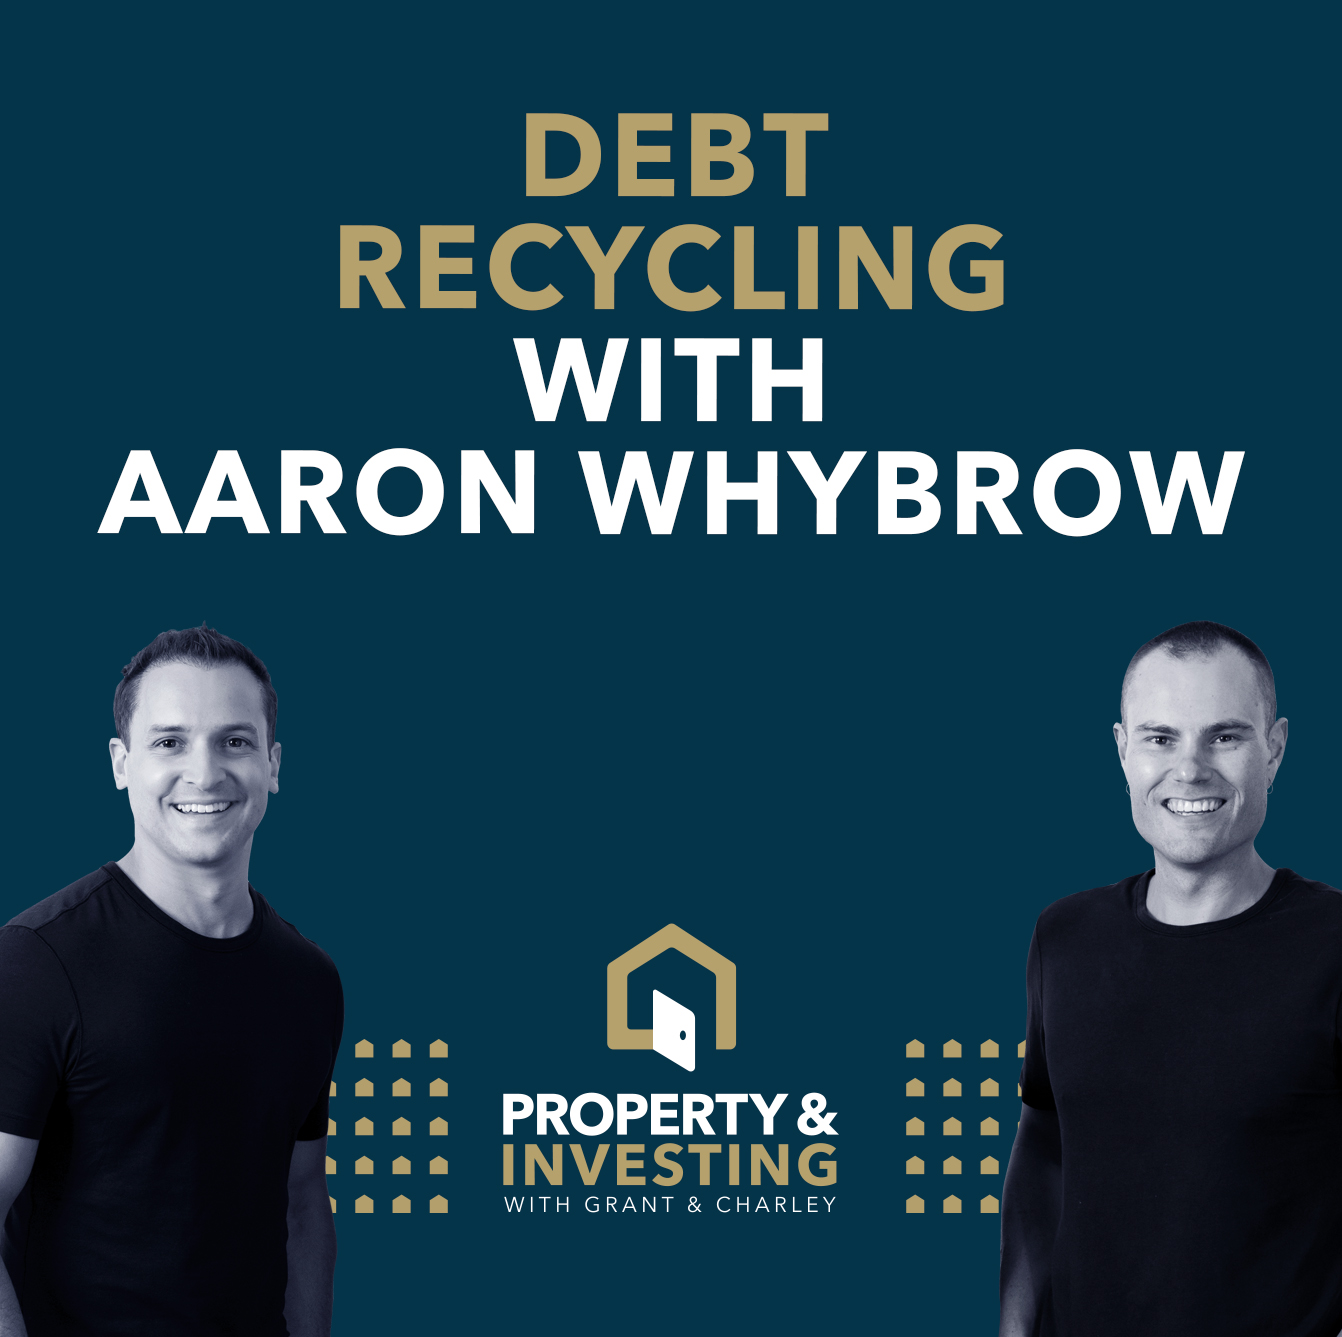 Debt Recycling with Aaron Whybrow